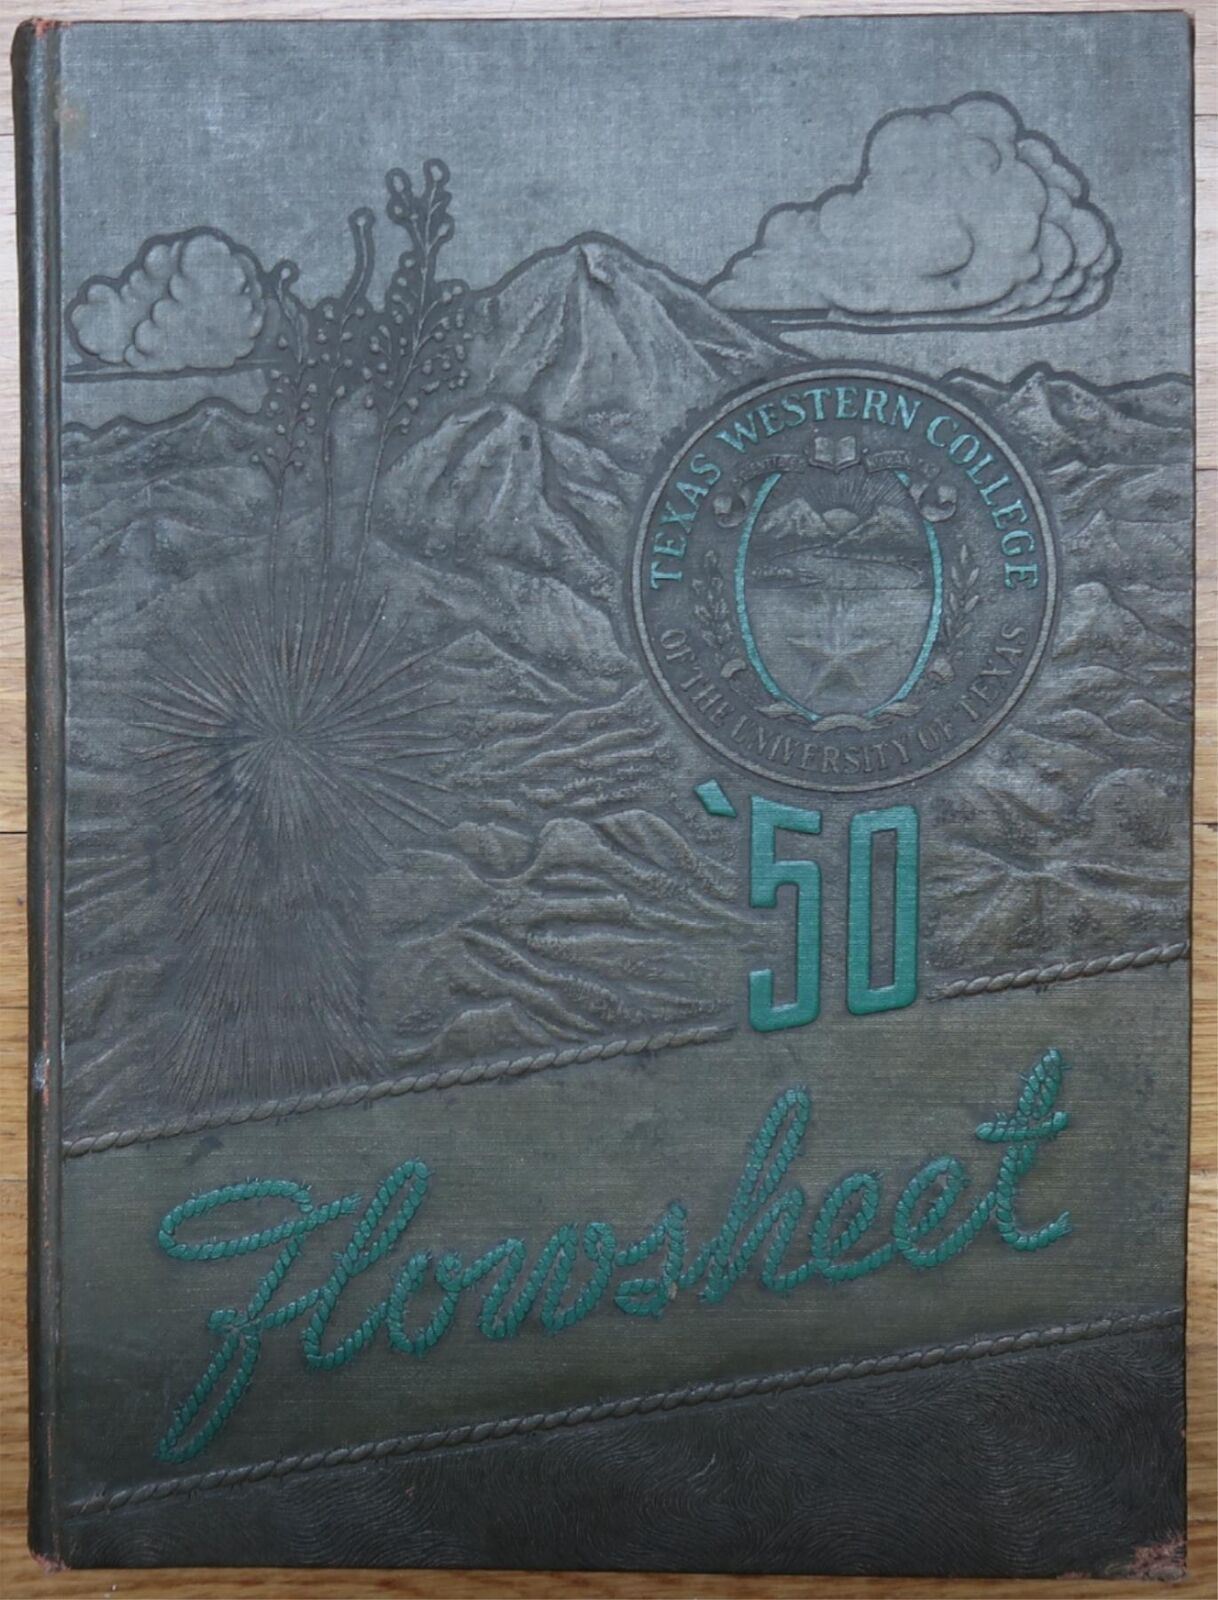 1950 TEXAS WESTERN COLLEGE FLOWSHEET YEARBOOK 1st YEAR NEW NAME EL PASO V1-1